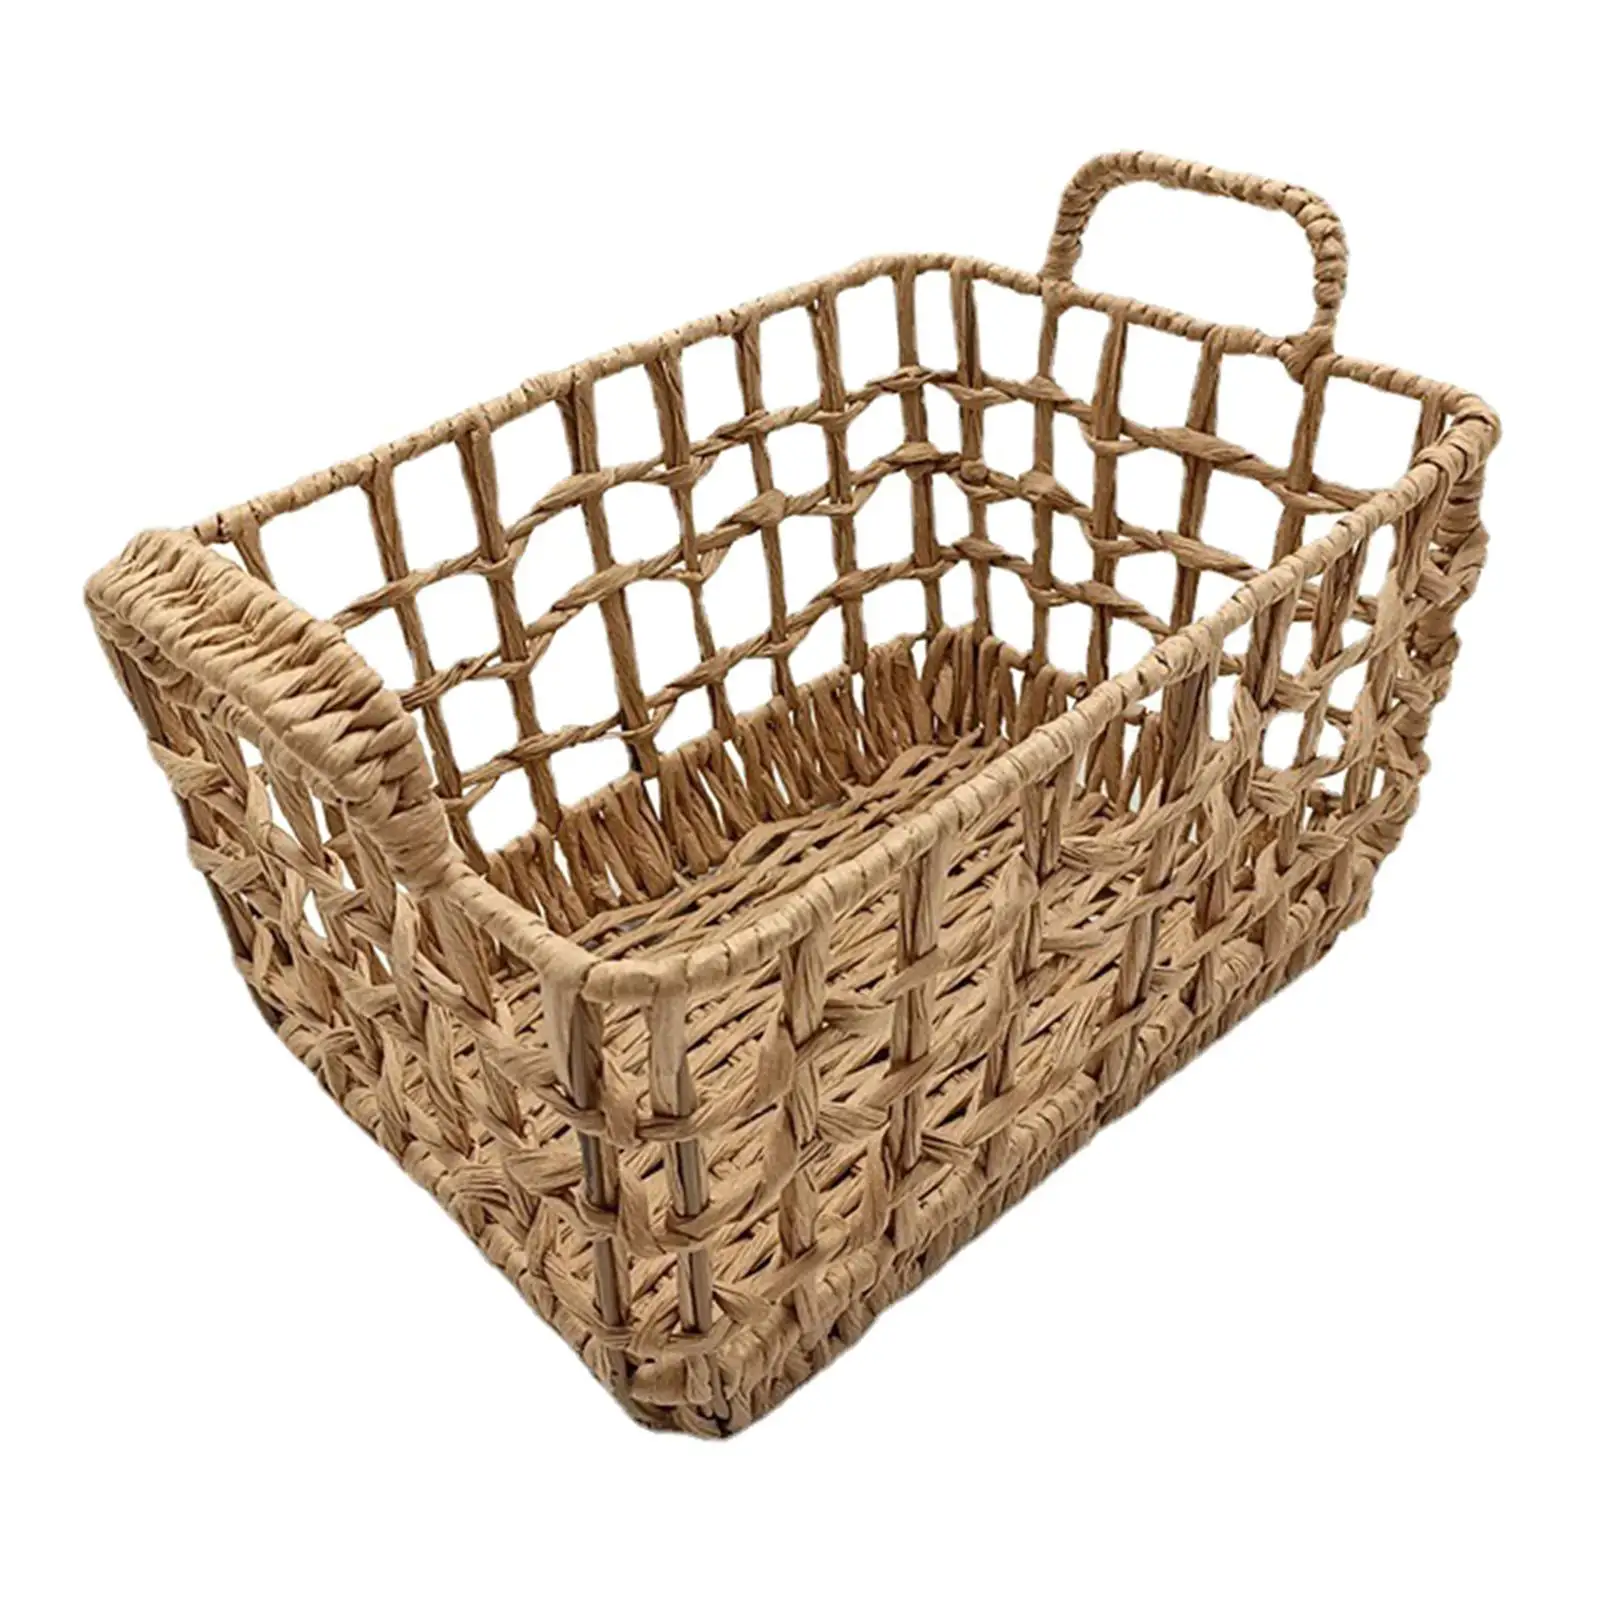 Vintage Woven Basket Decor Backdrop Comfortable Gifts Multipurpose Posing Props for 0-3 Months Photo Taking Baby Shower Studio